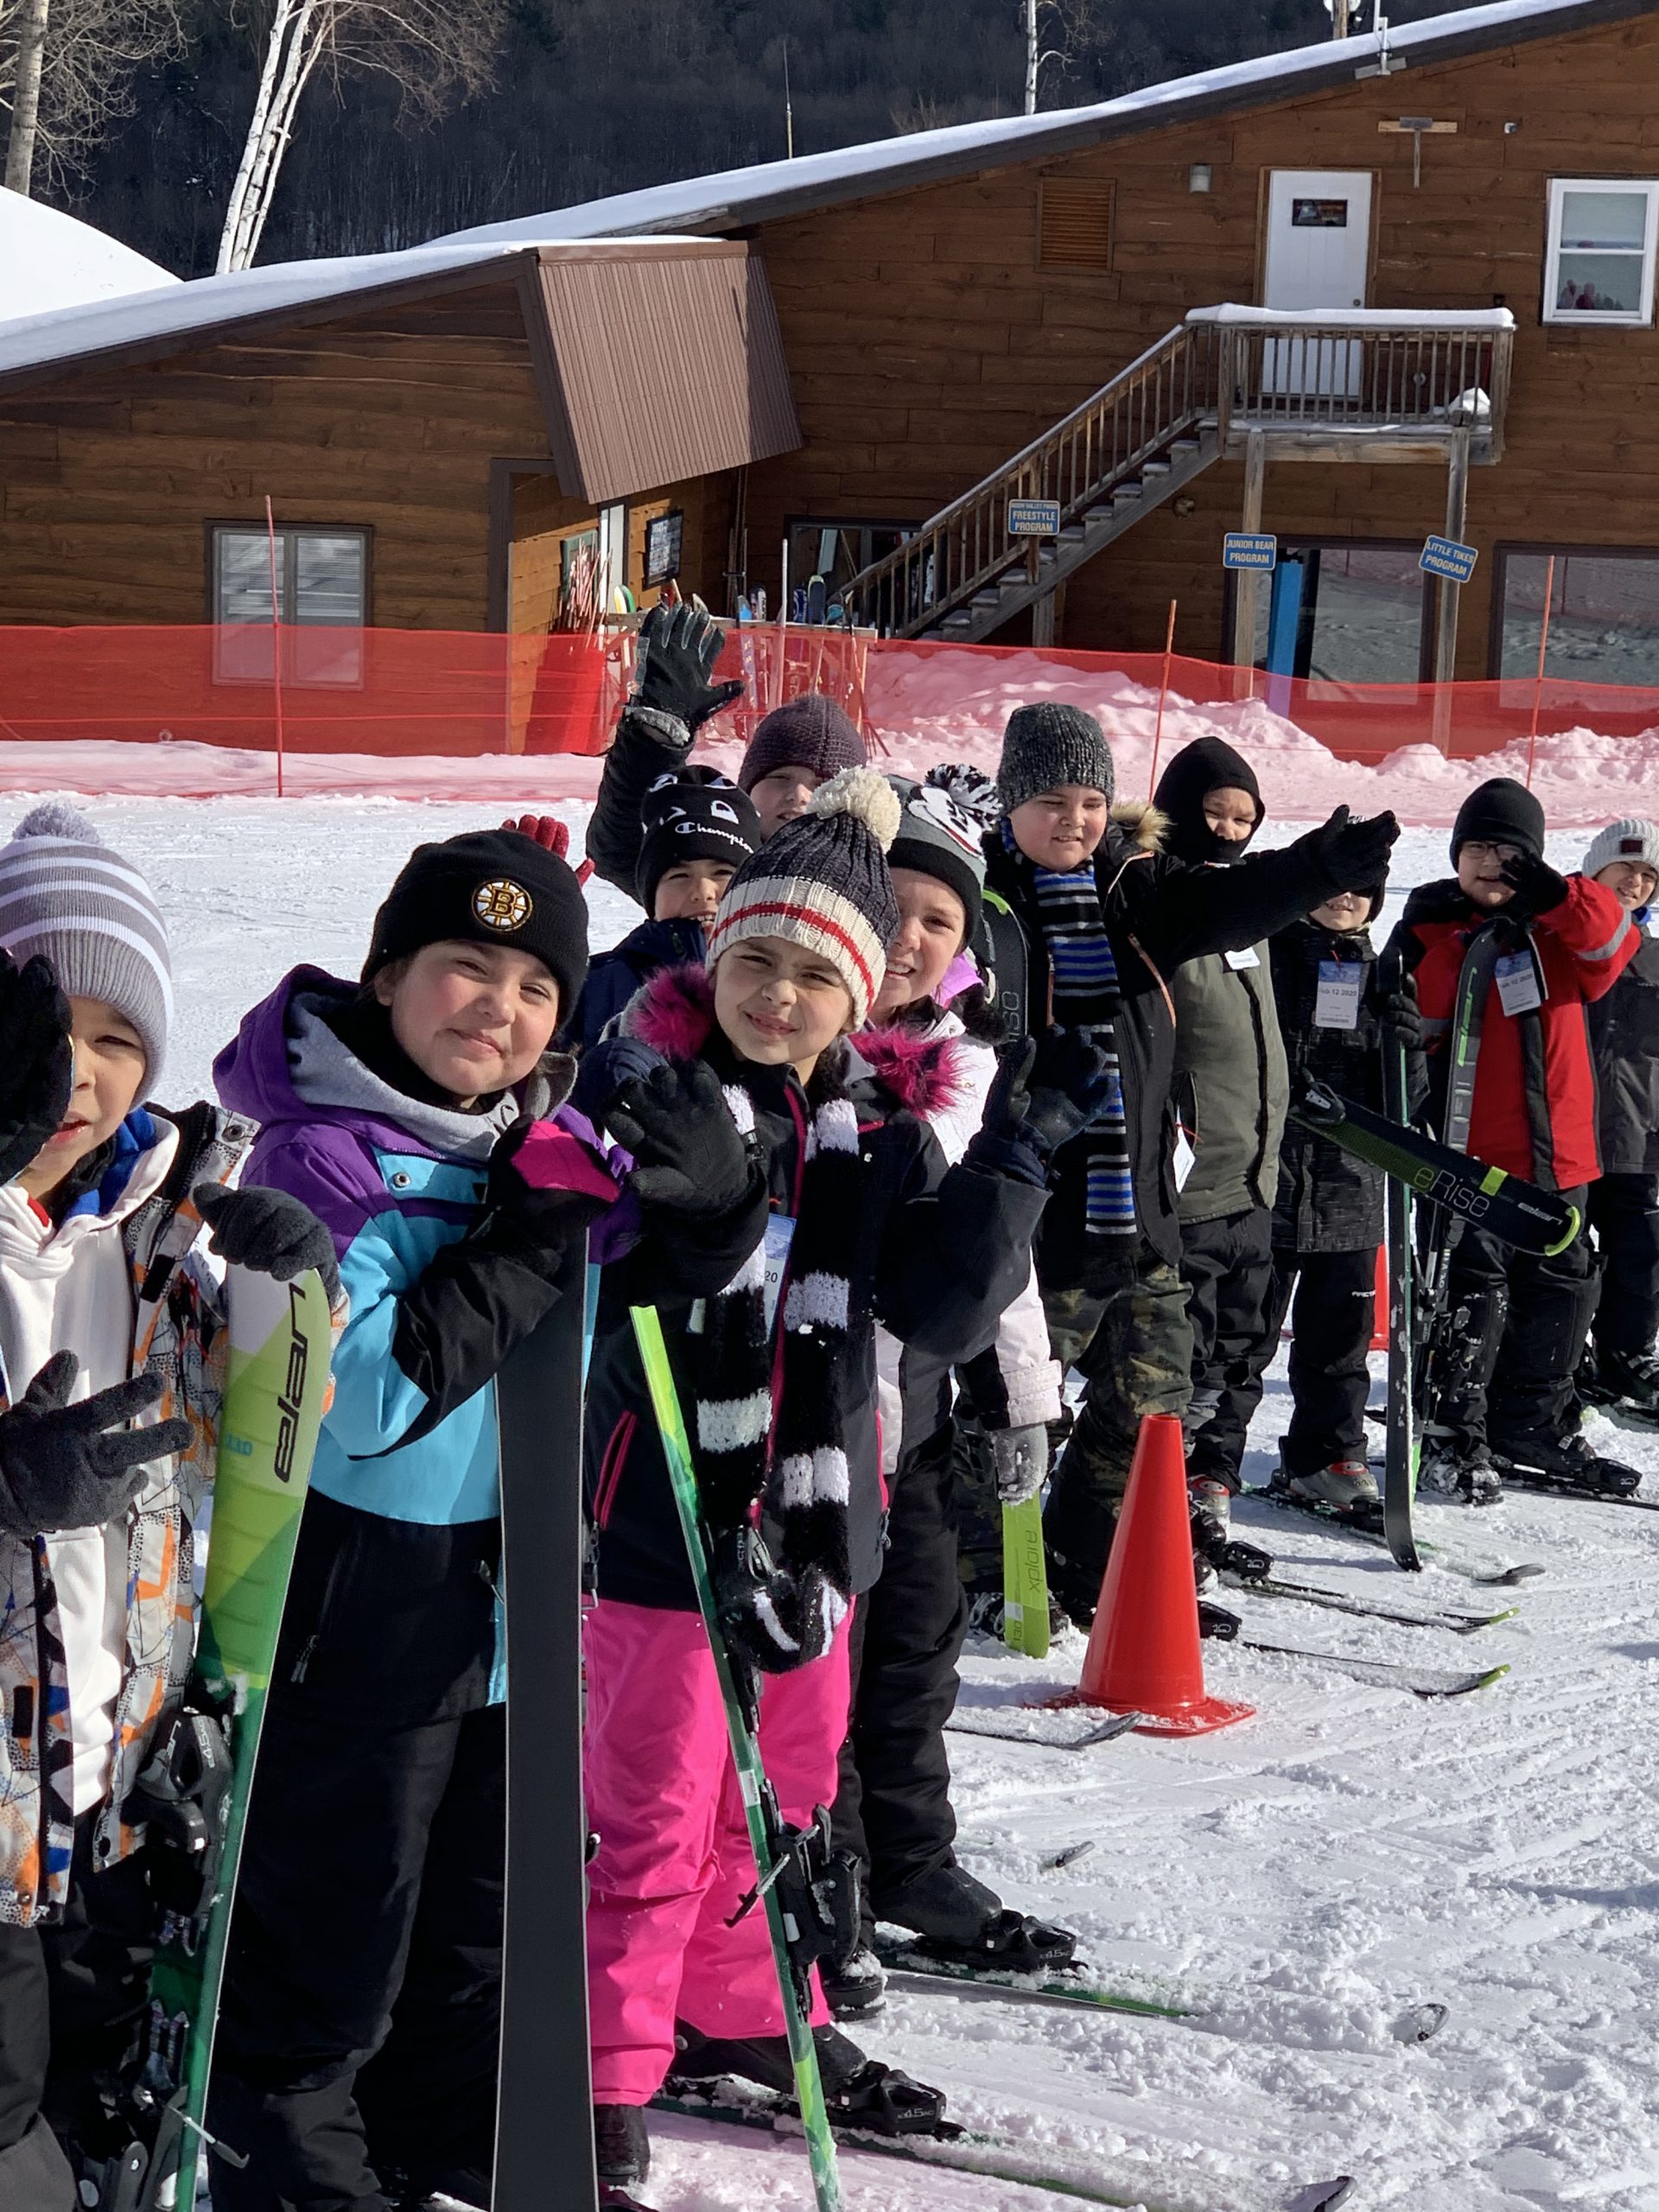 Group of skiers ready to hit the slopes